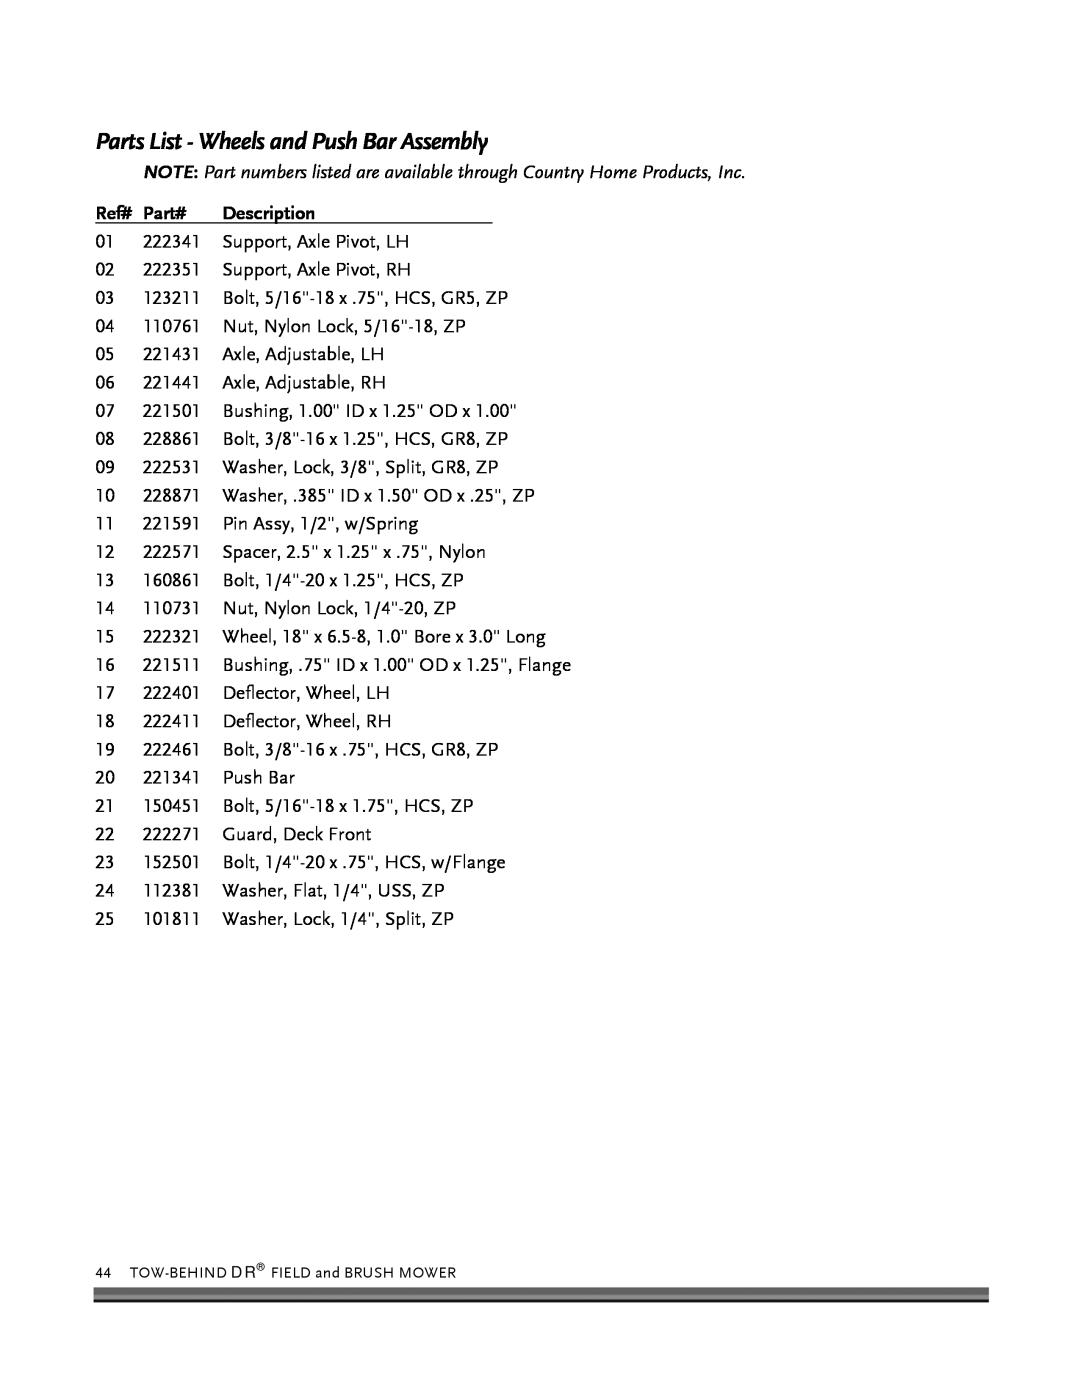 Briggs & Stratton FIELD and BRUSH MOWER manual Parts List - Wheels and Push Bar Assembly, Part#, Description 